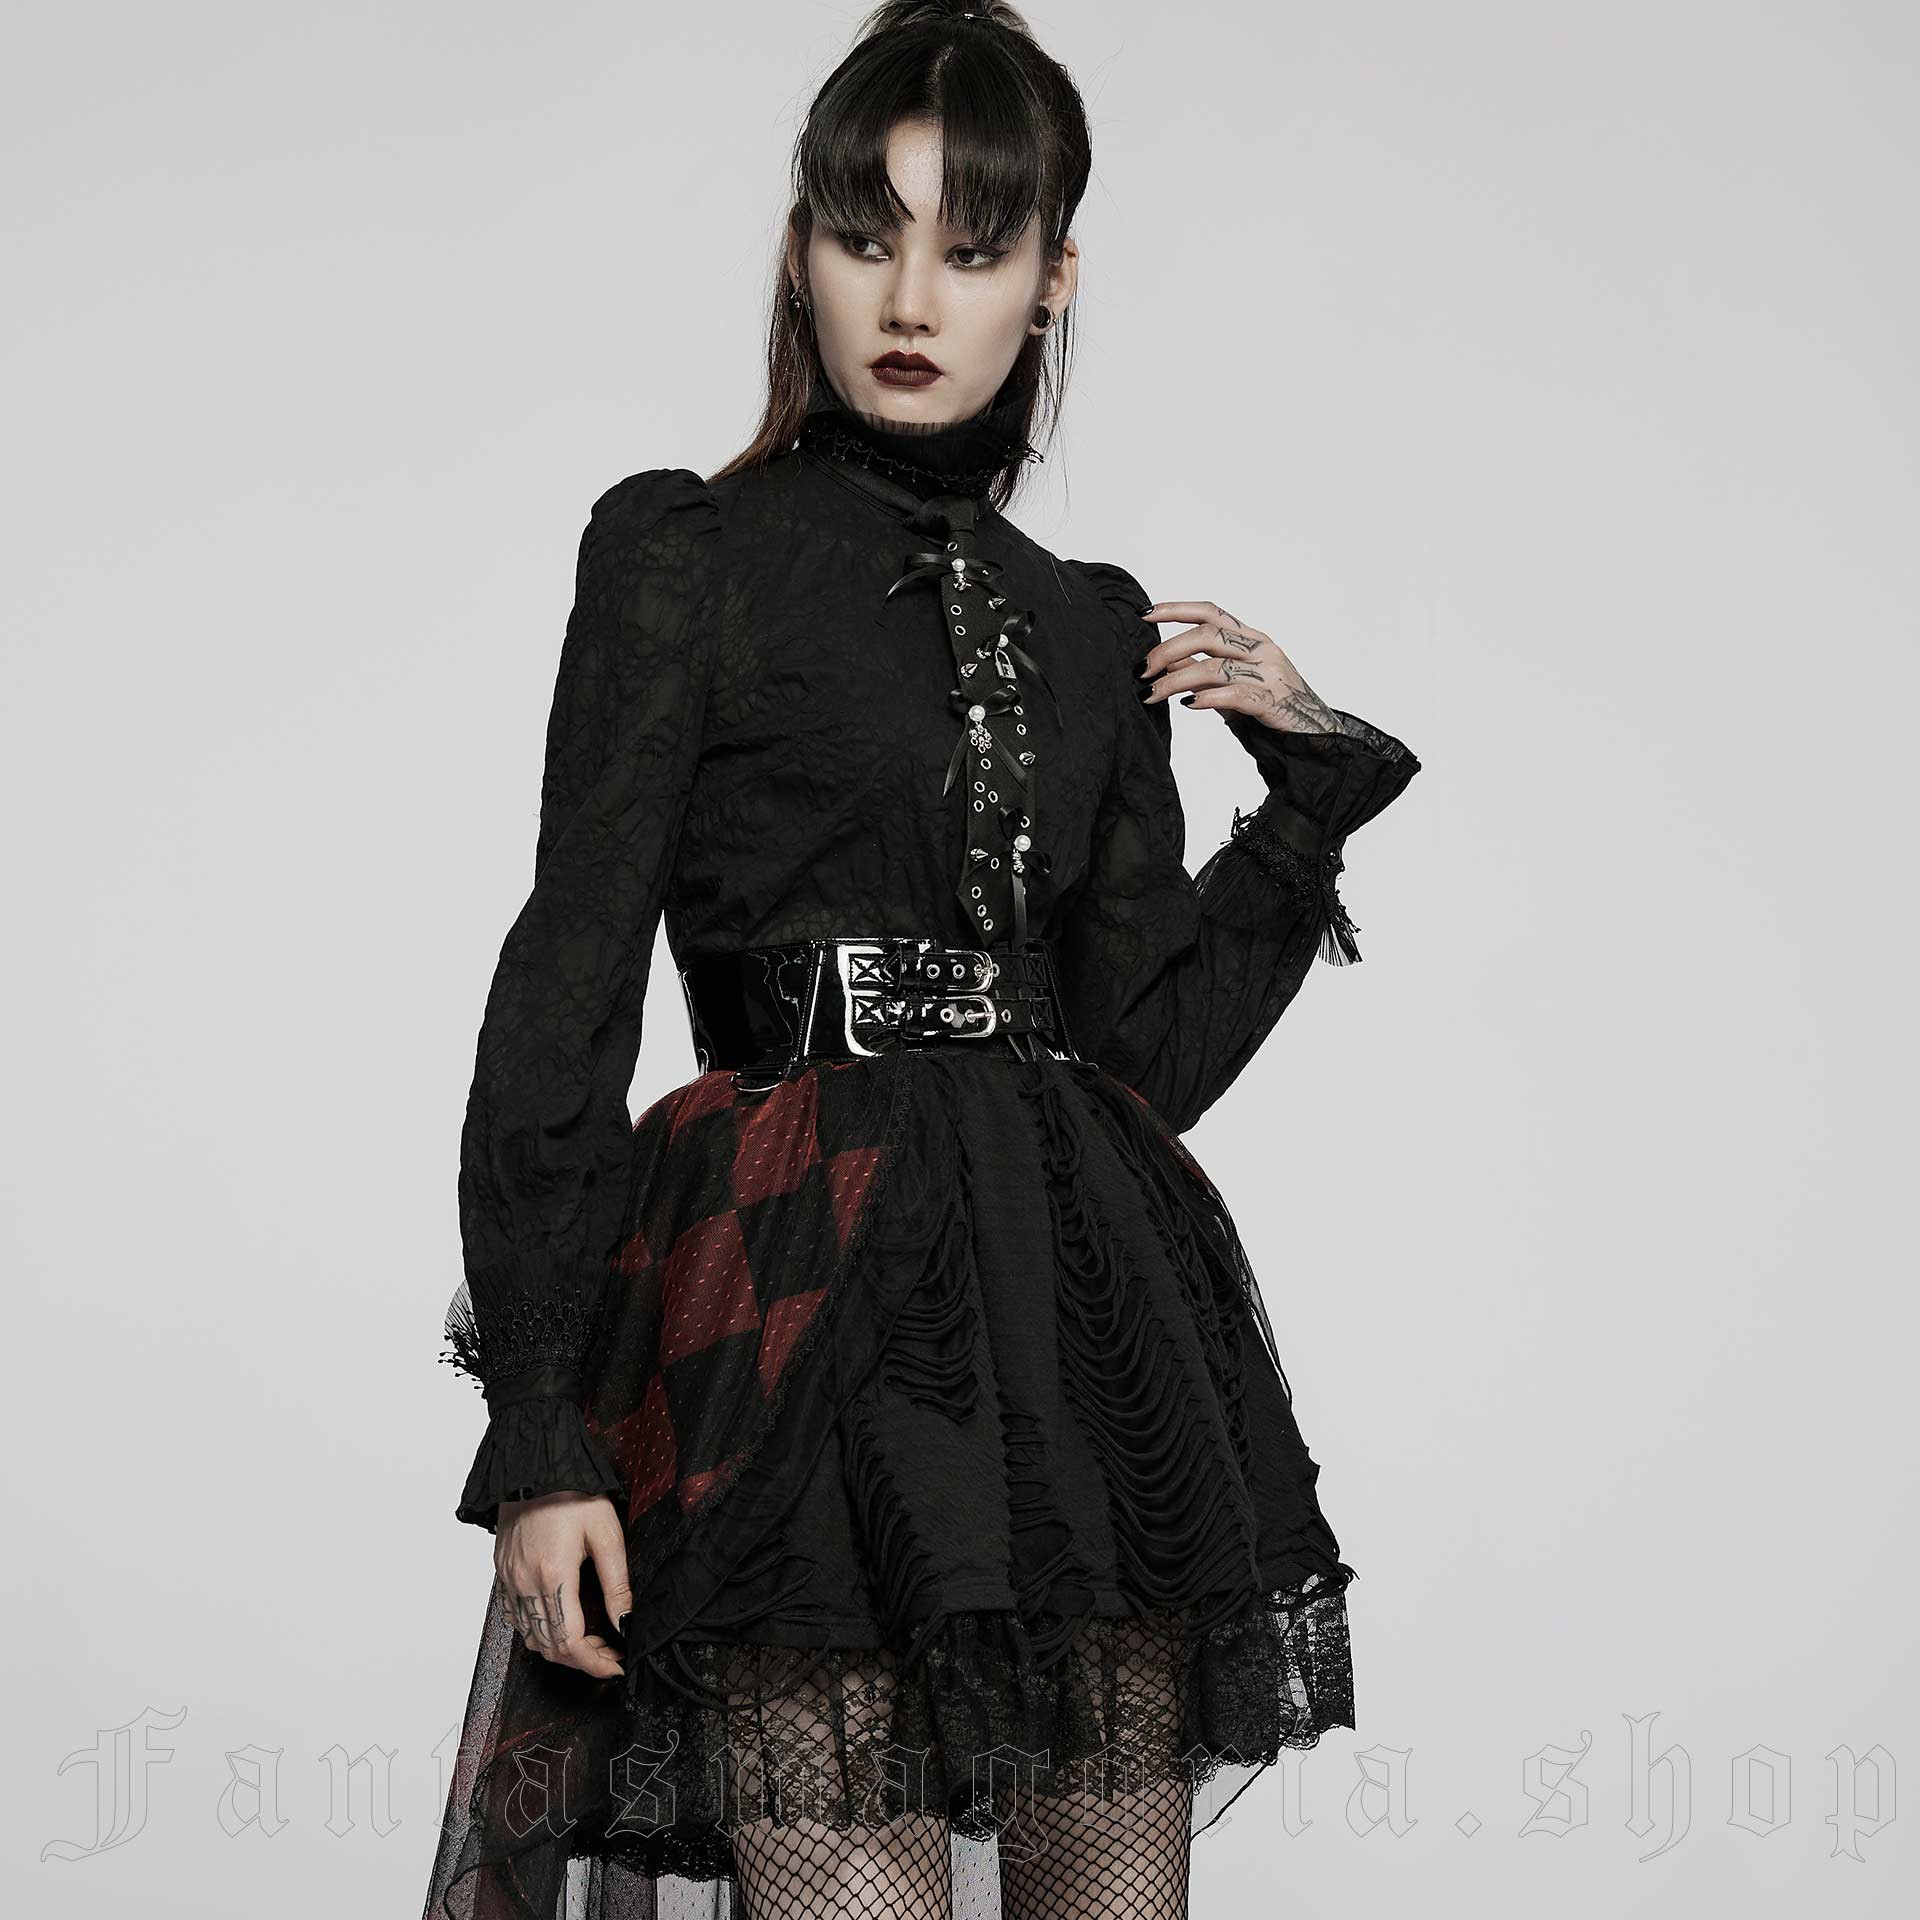 Gothic Techwear Blouse w/ Tie and Silver Accessories